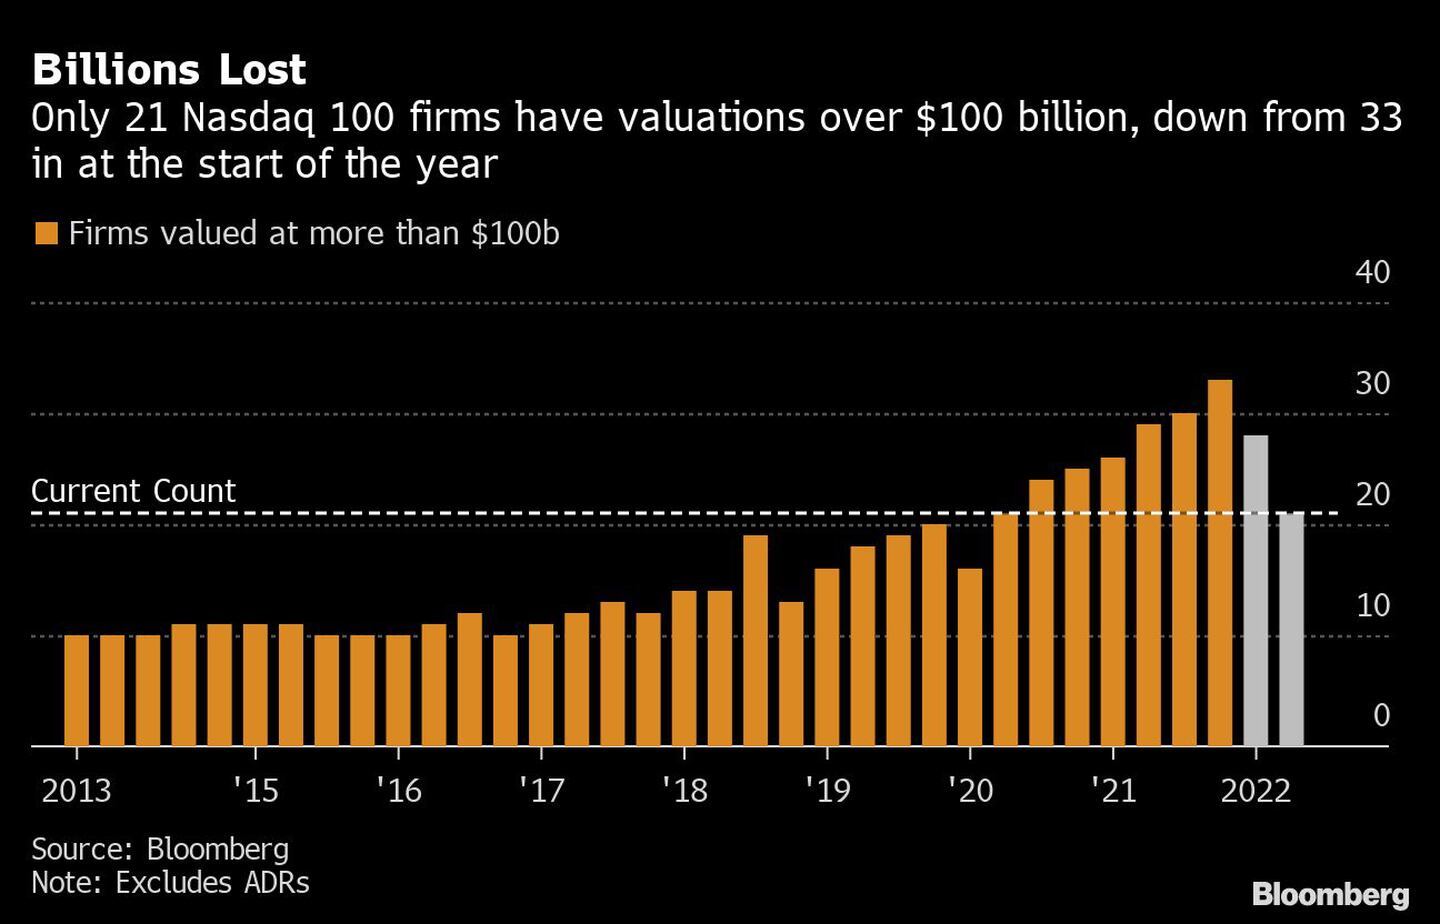 Billions Lost  | Only 21 Nasdaq 100 firms have valuations over $100 billion, down from 33 in at the start of the yeardfd